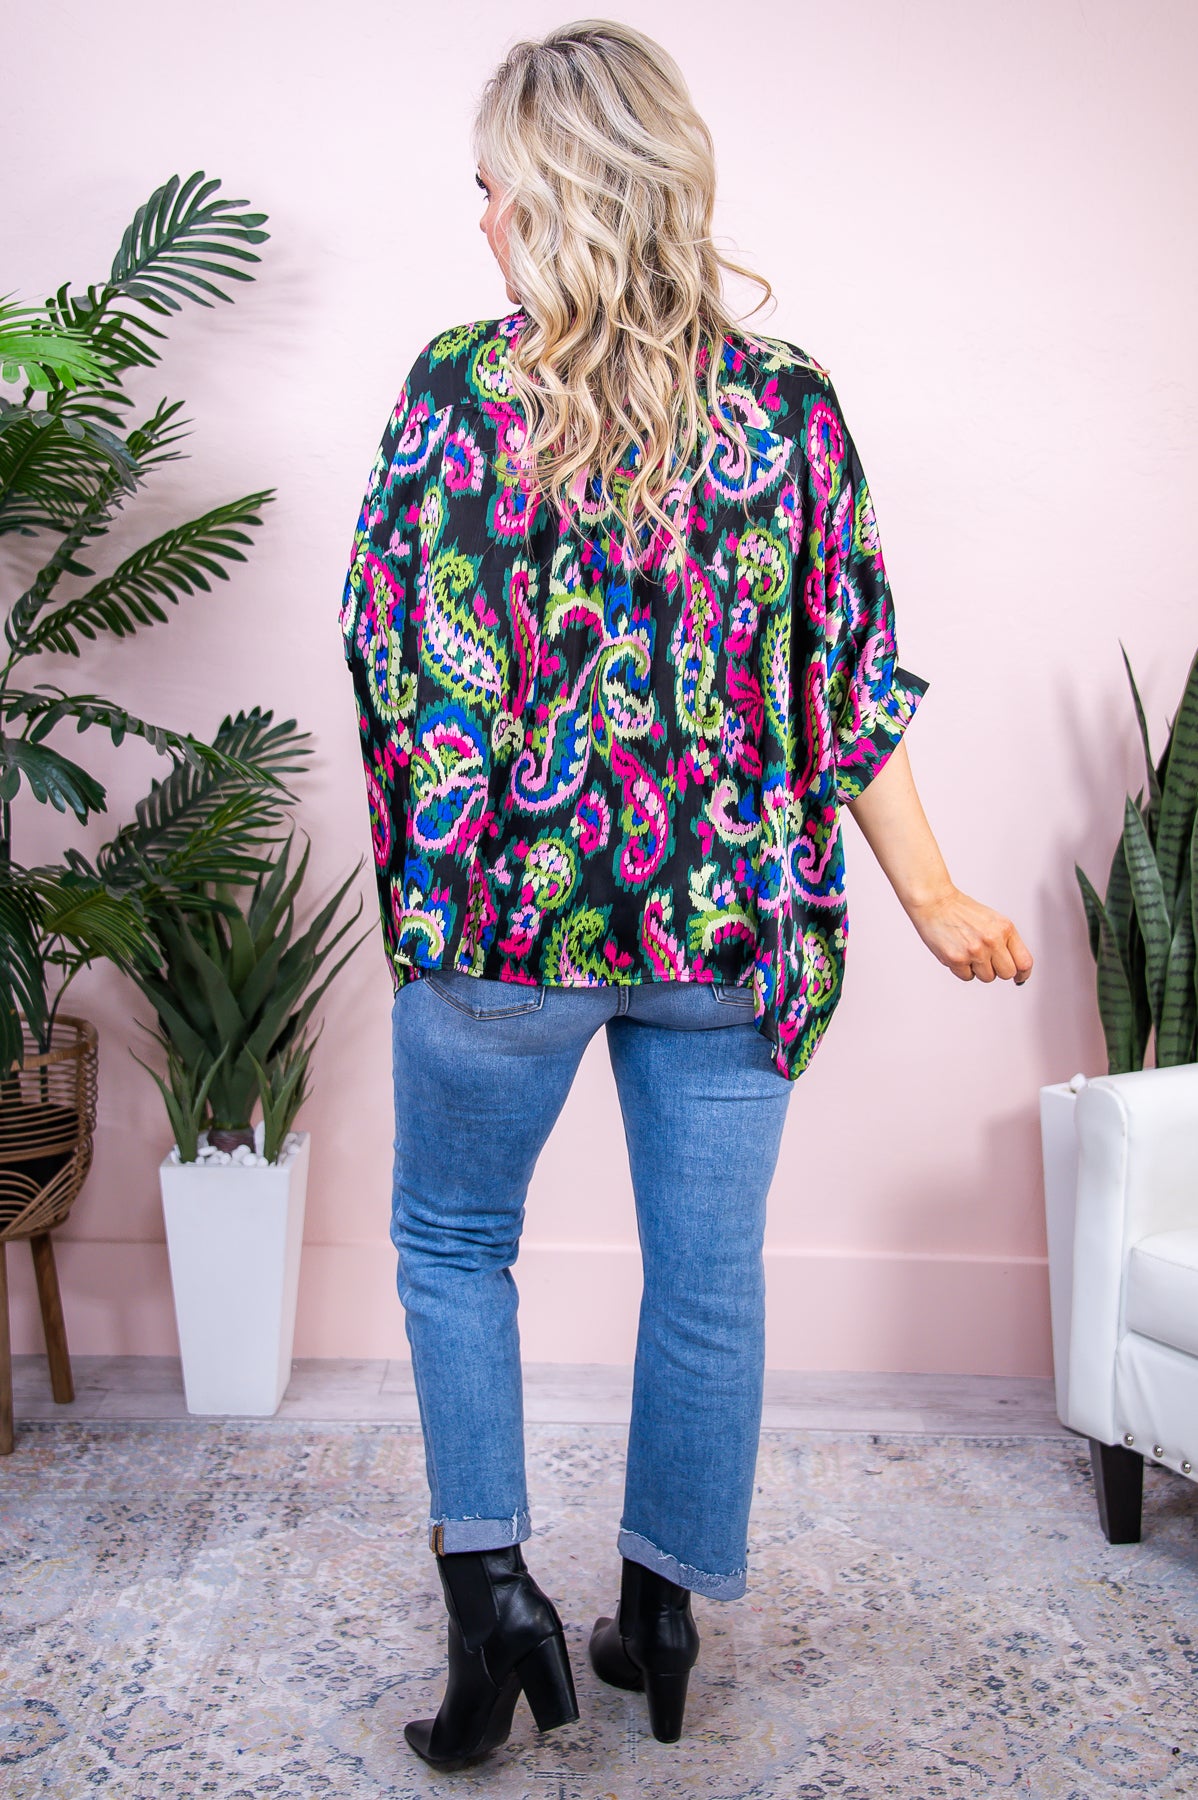 Boost Your Confidence Black/Green/Pink Paisley Top - T8673BK